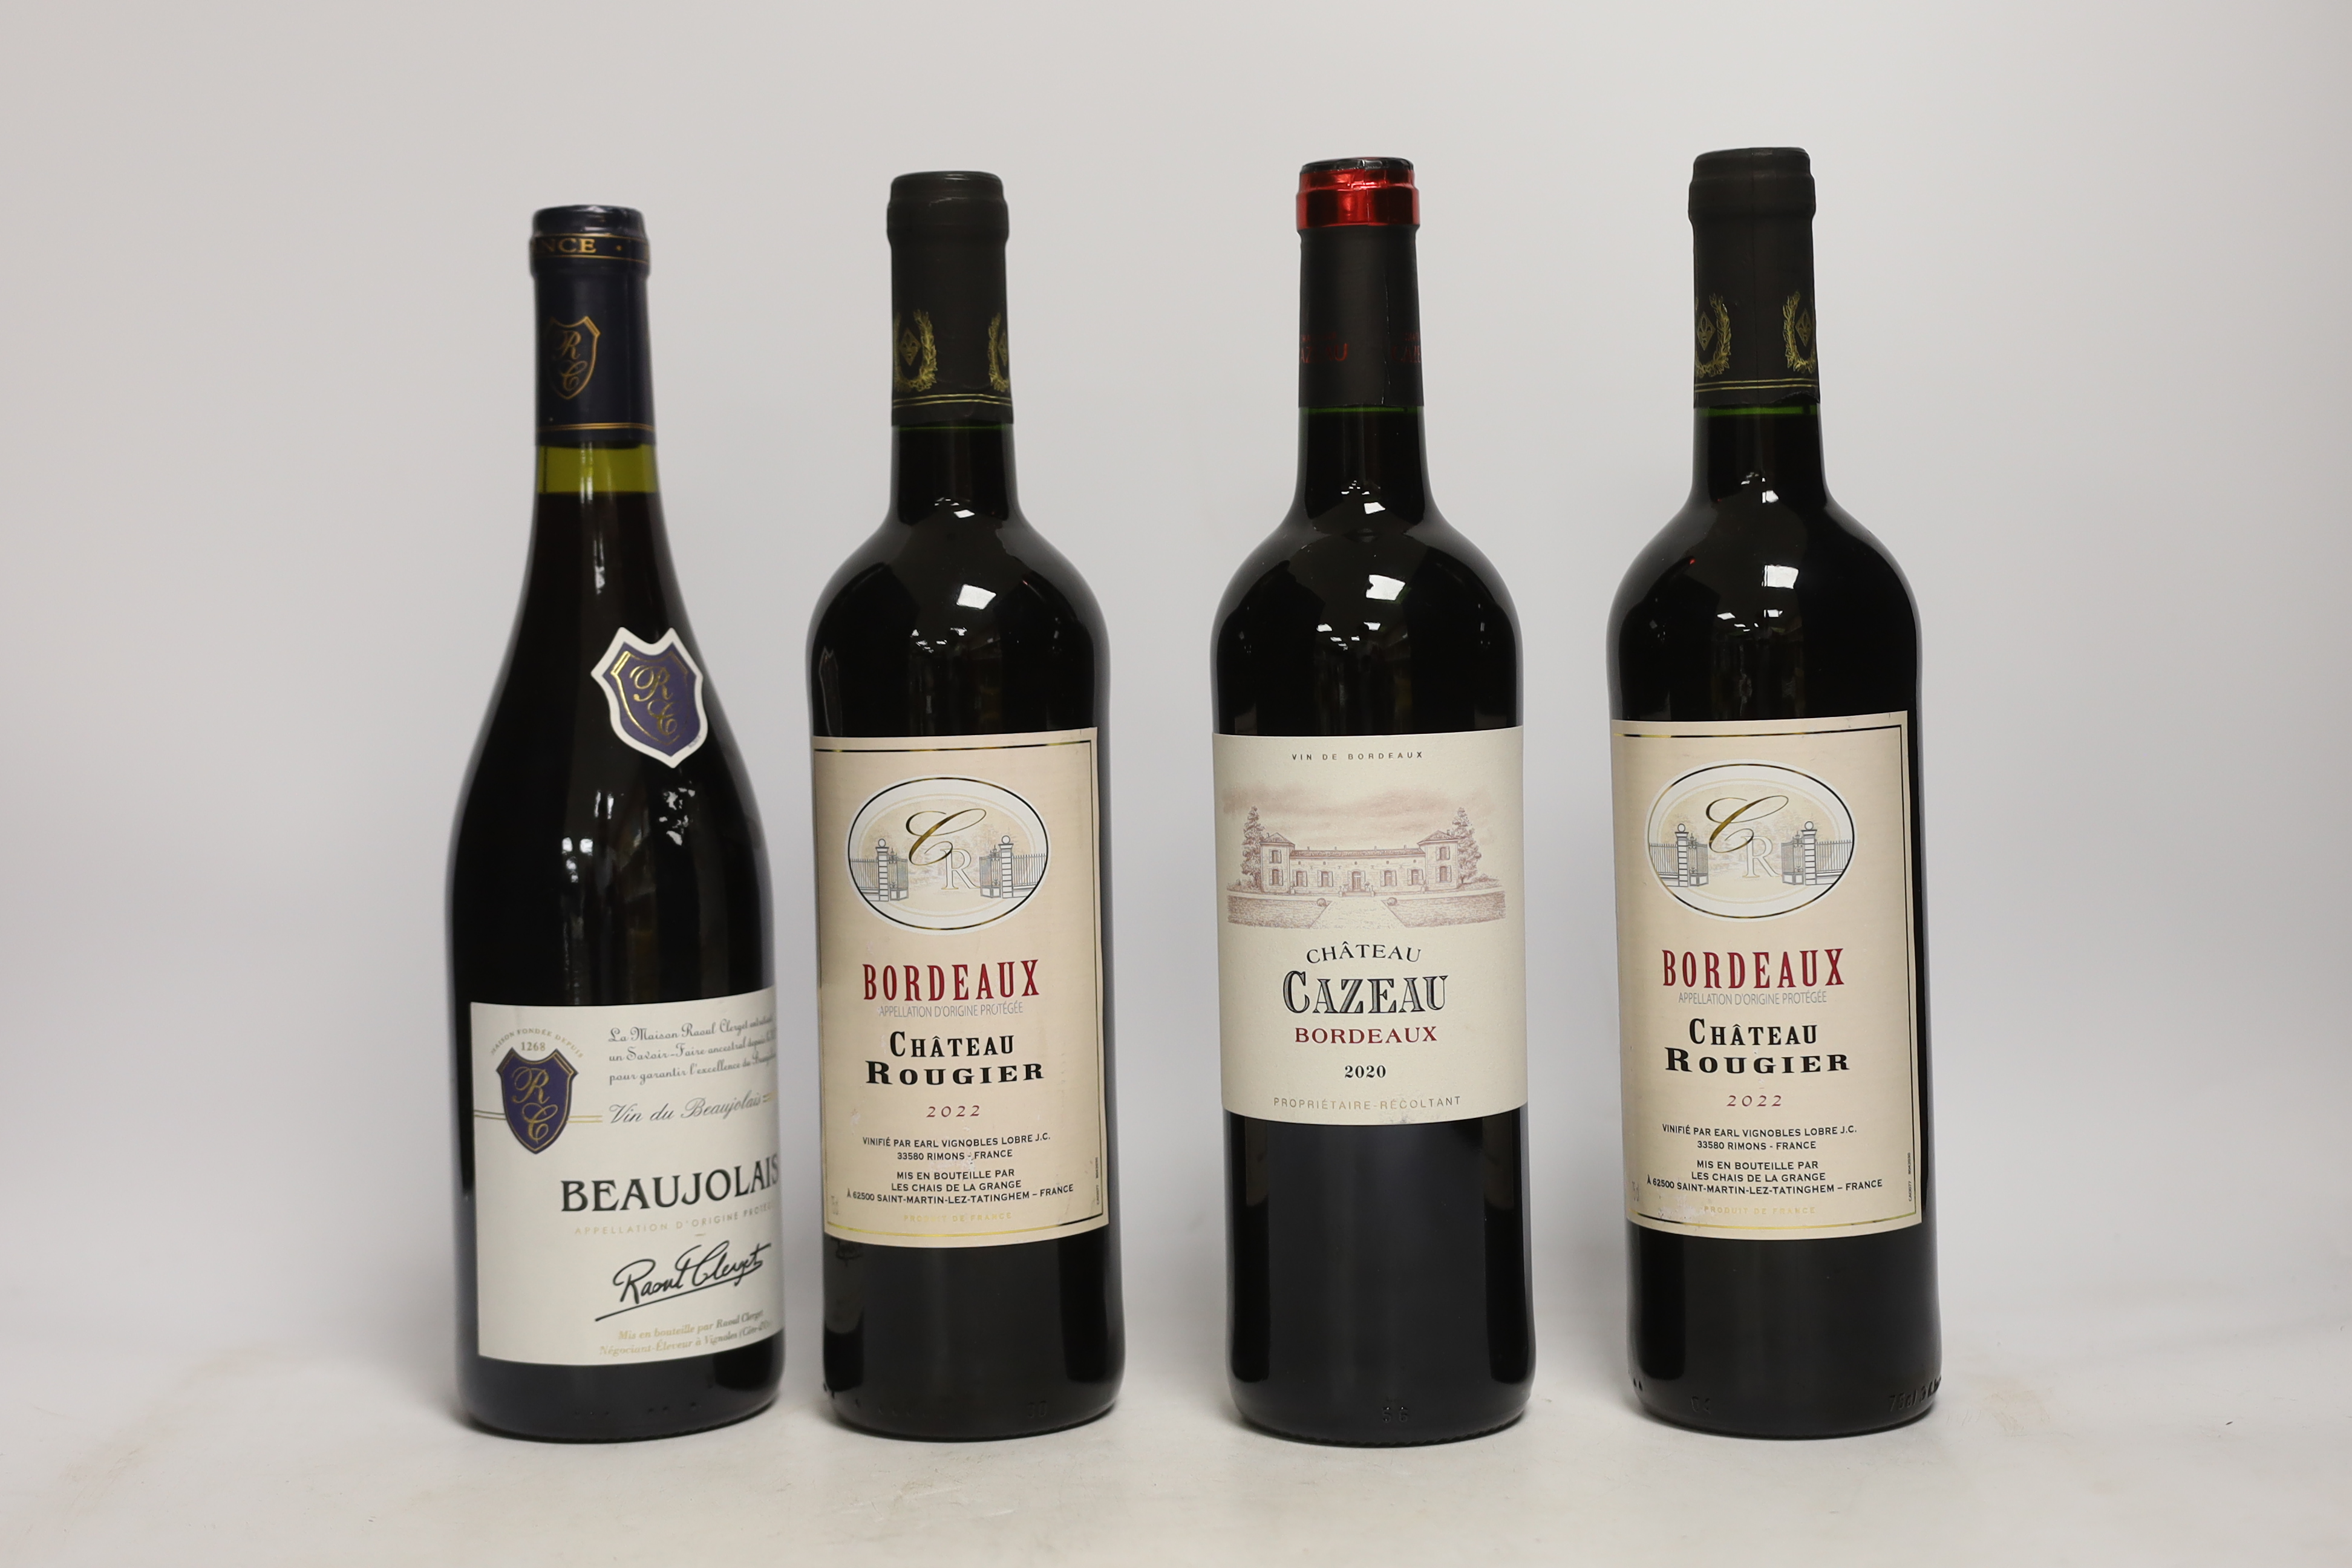 Eight bottles of wine including - three bottles of Moncade Bordeaux, two bottles of Chateau - Image 2 of 2